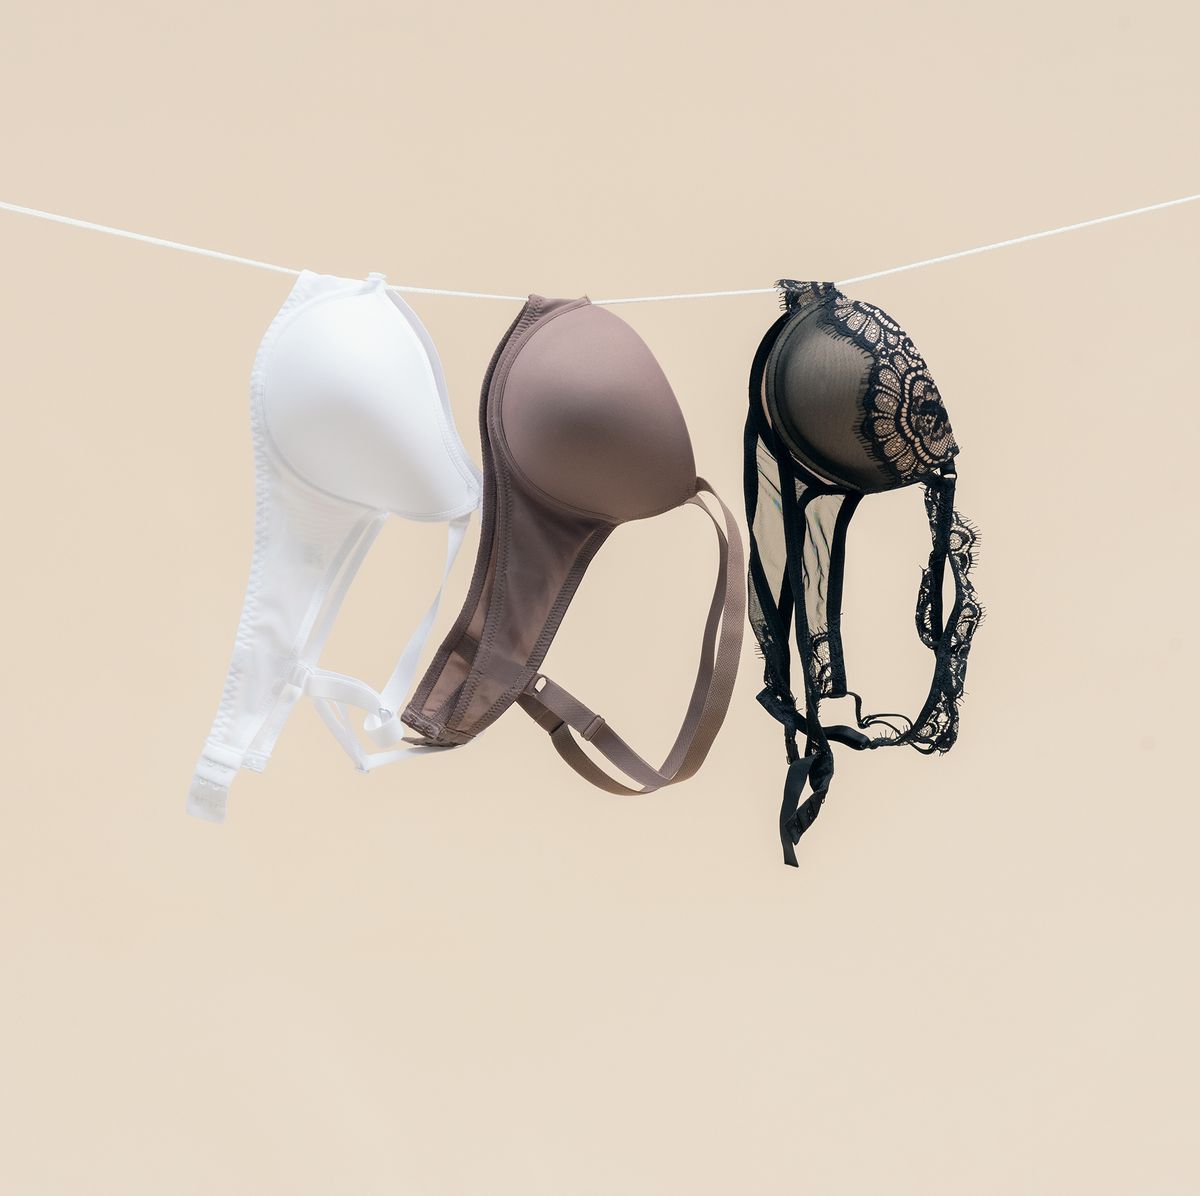 Everyone has to have a good bra in their repertoire. Check out